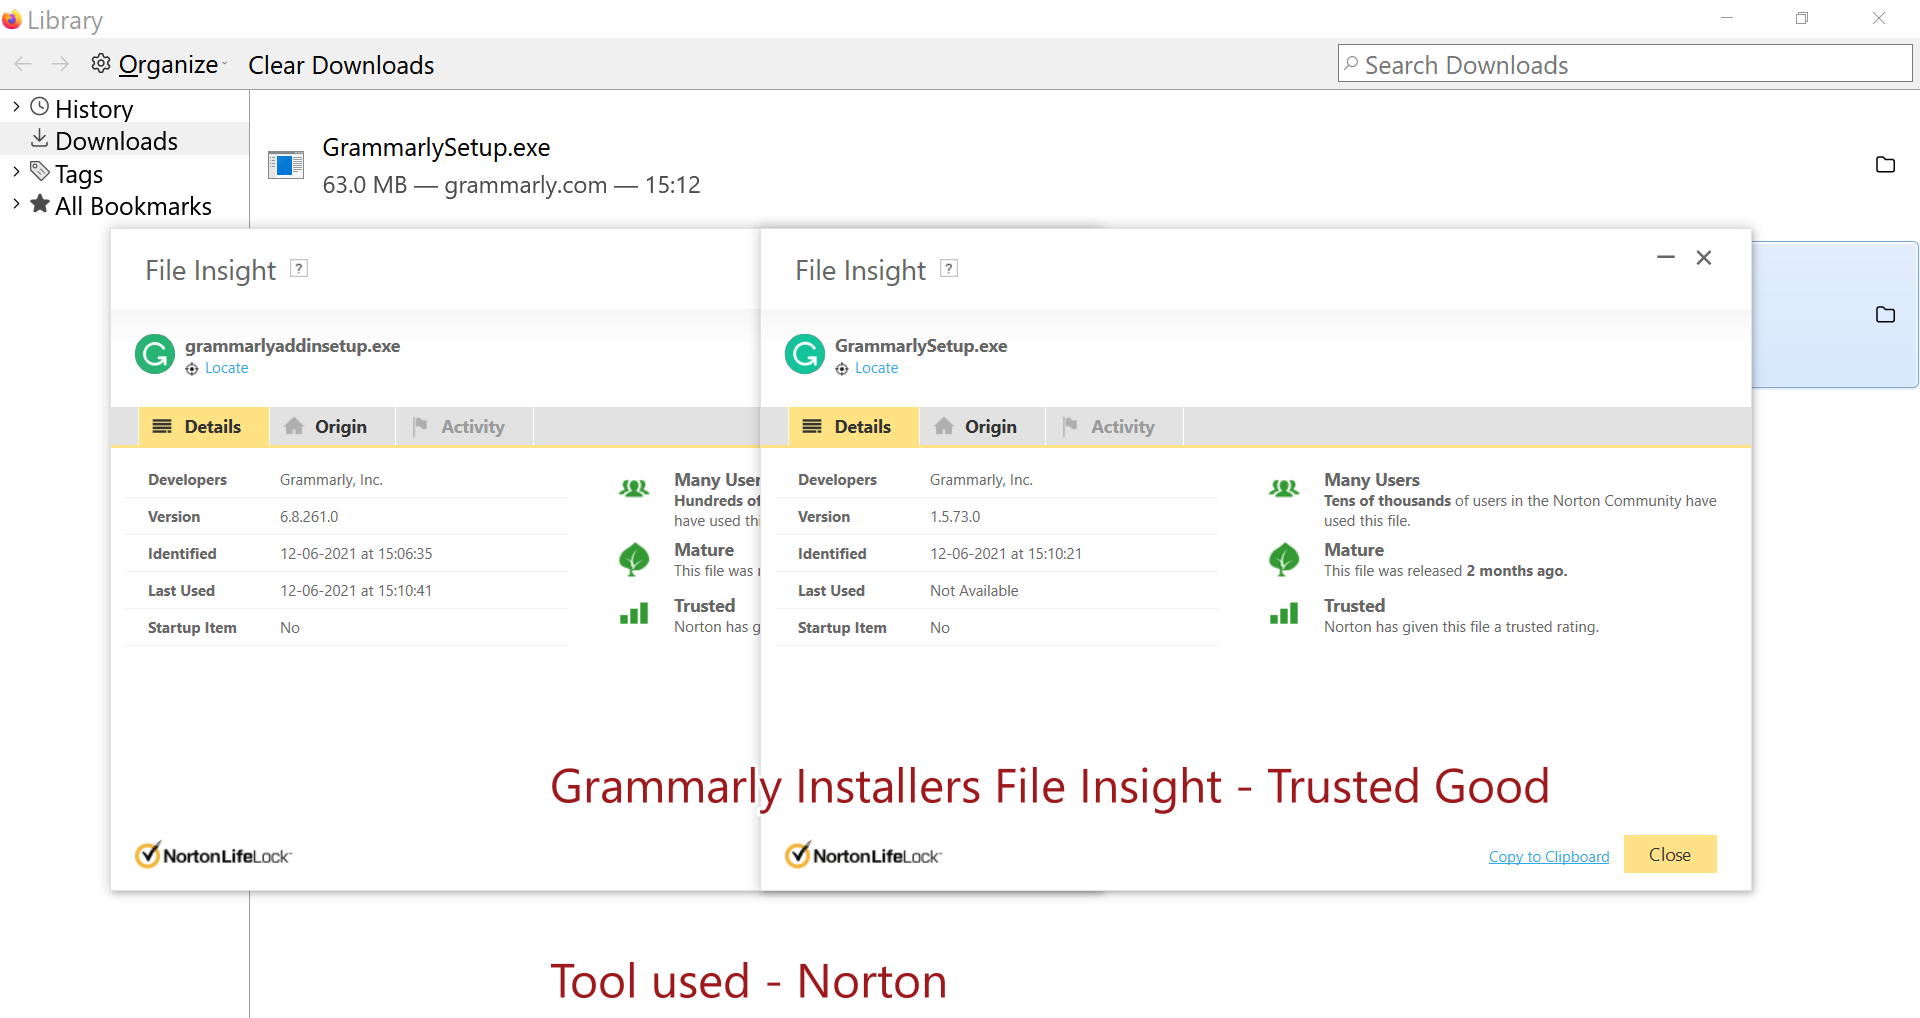 Grammarly Installers File Insight